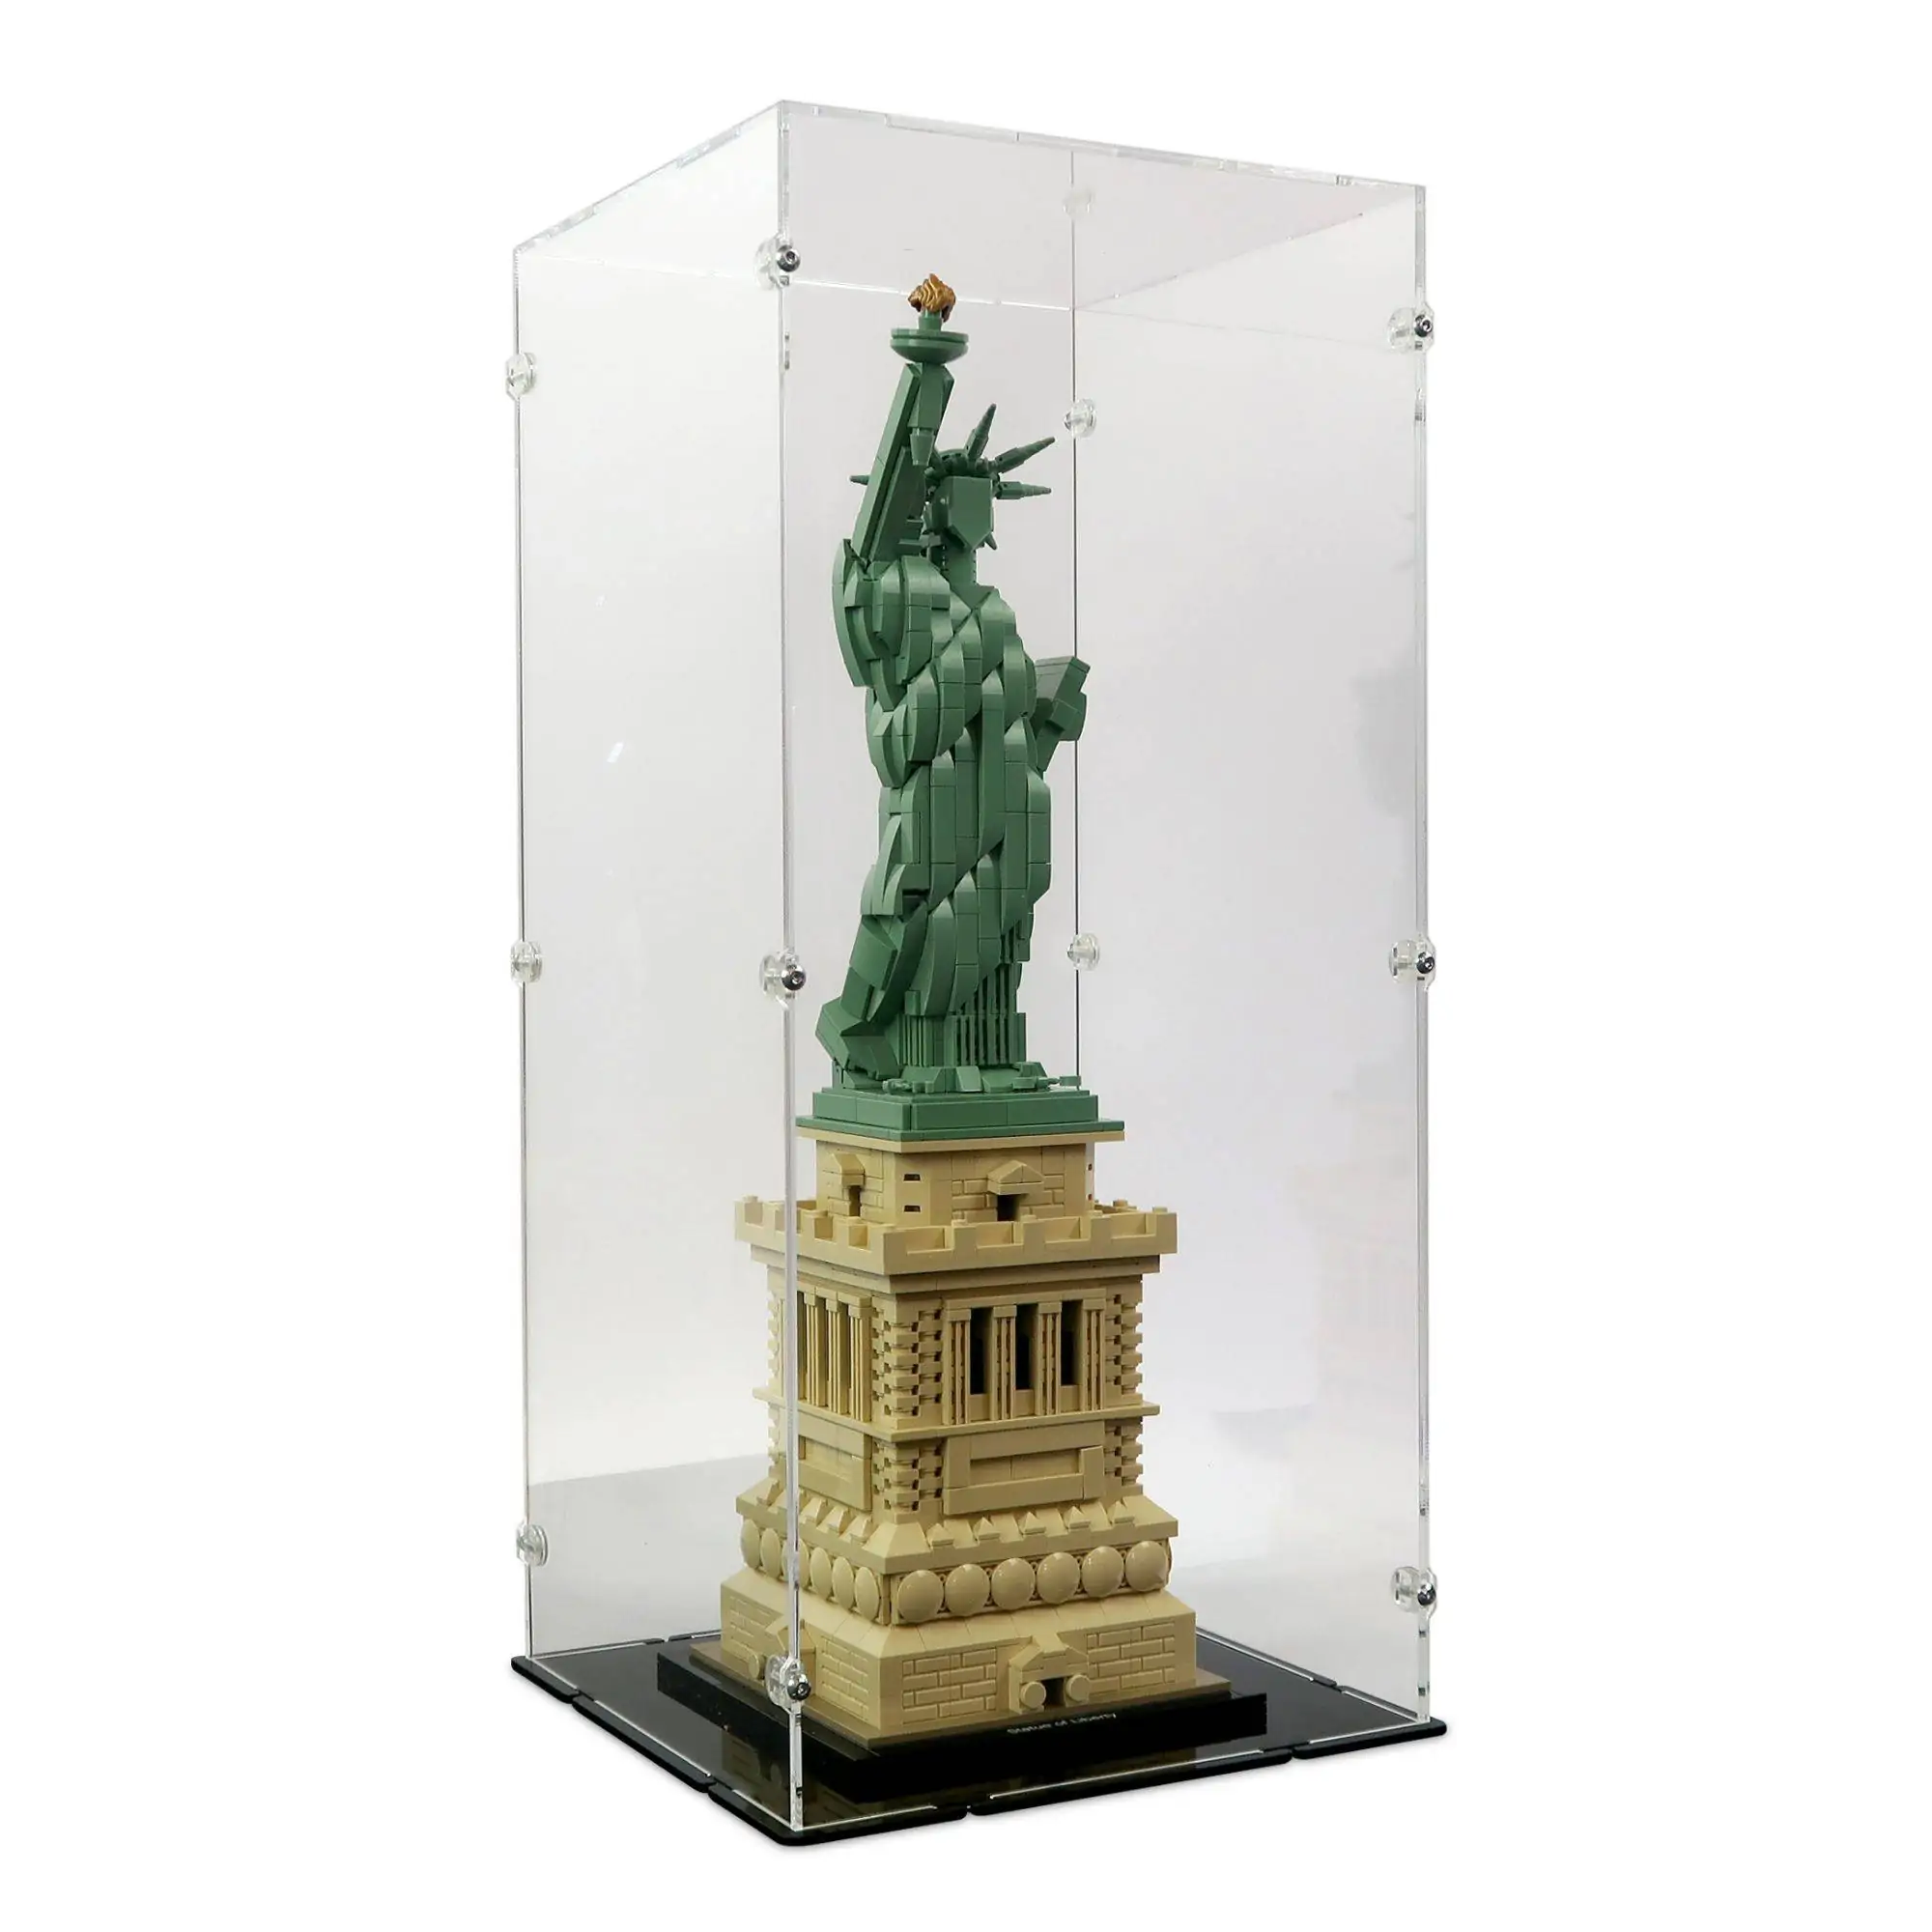 LEGO Architecture 21042 Statue of Liberty review